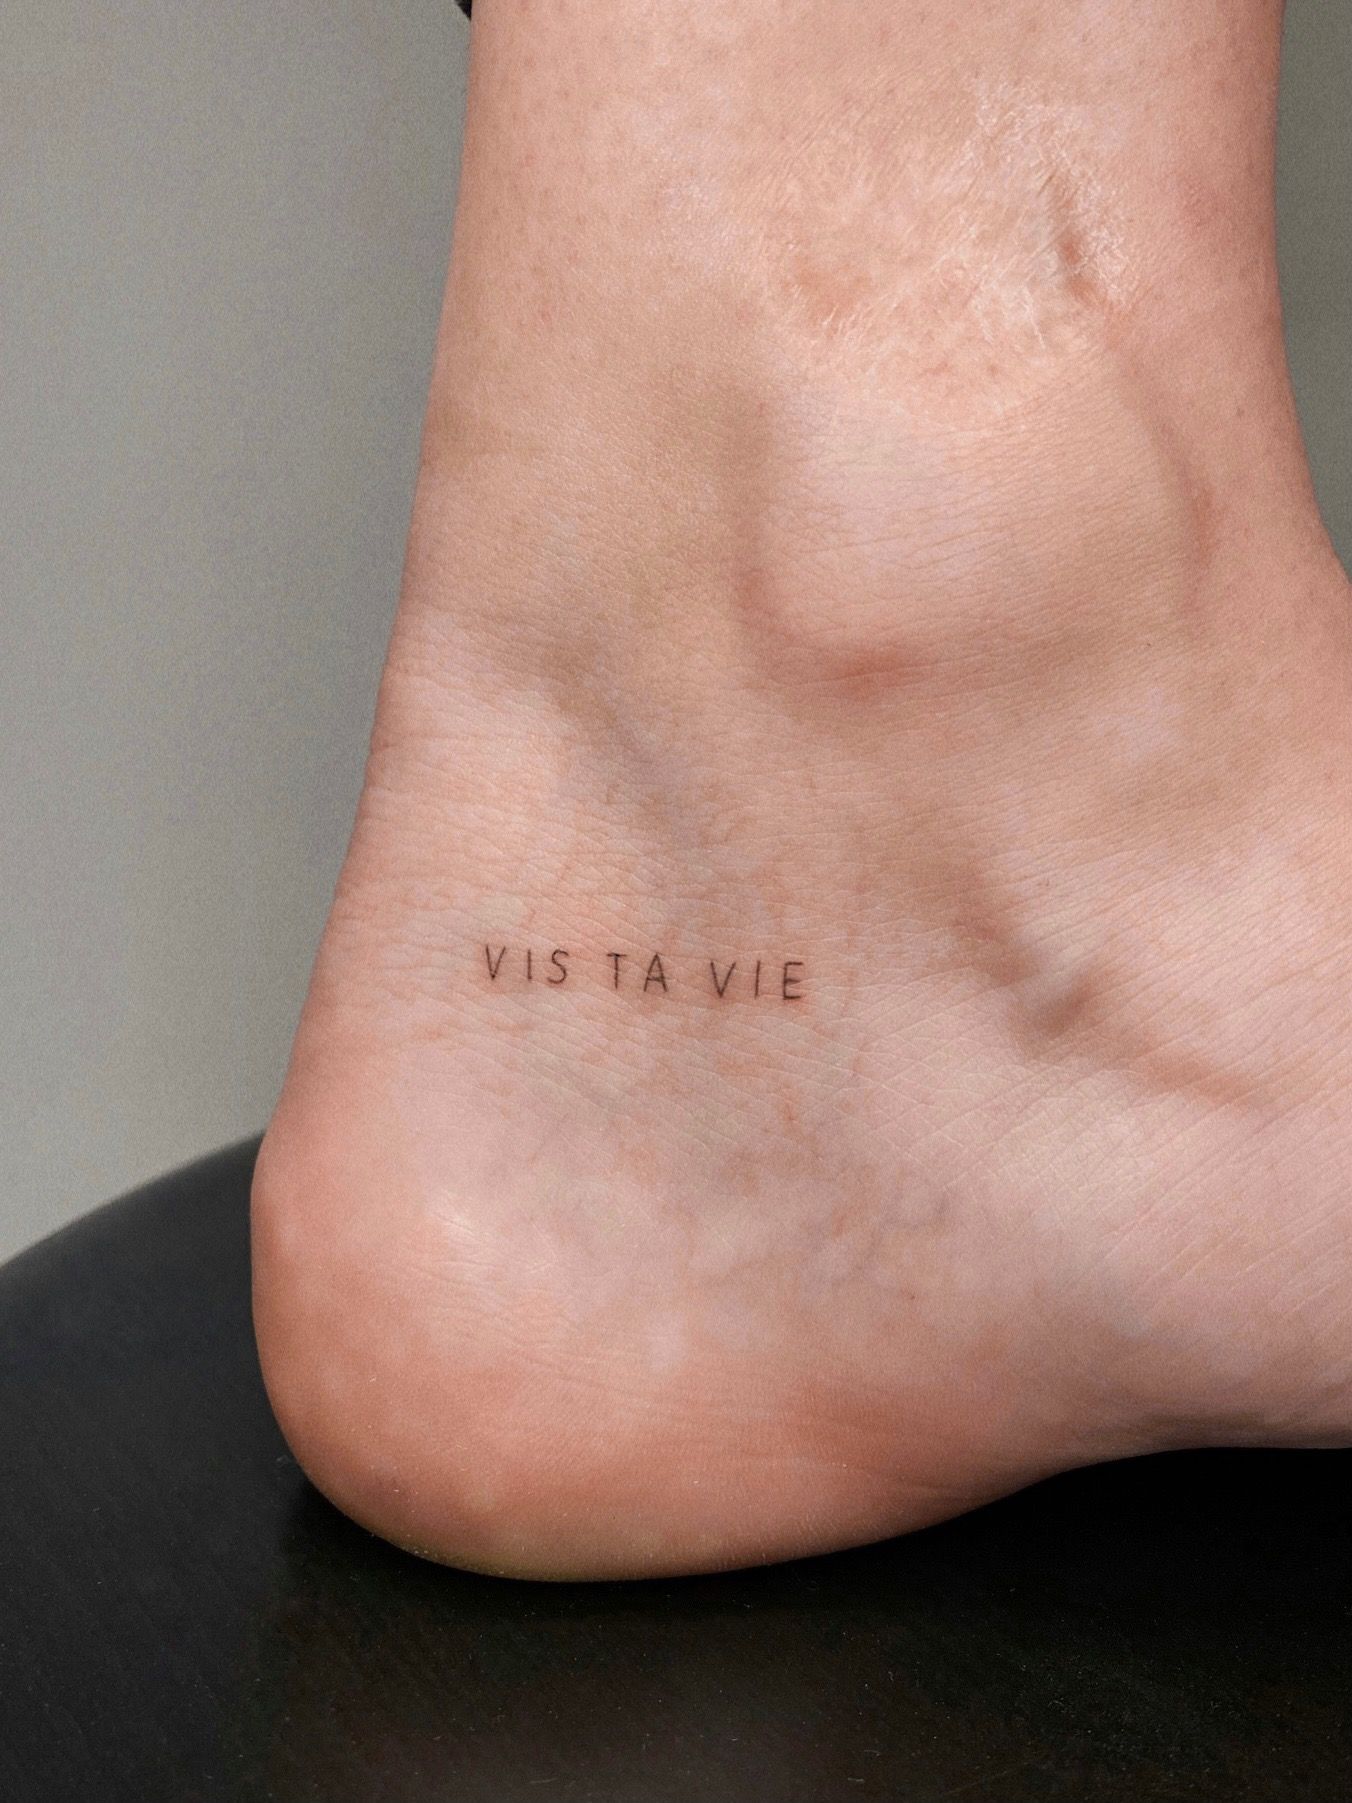 Tattoo that says vis ta vie located on the thigh